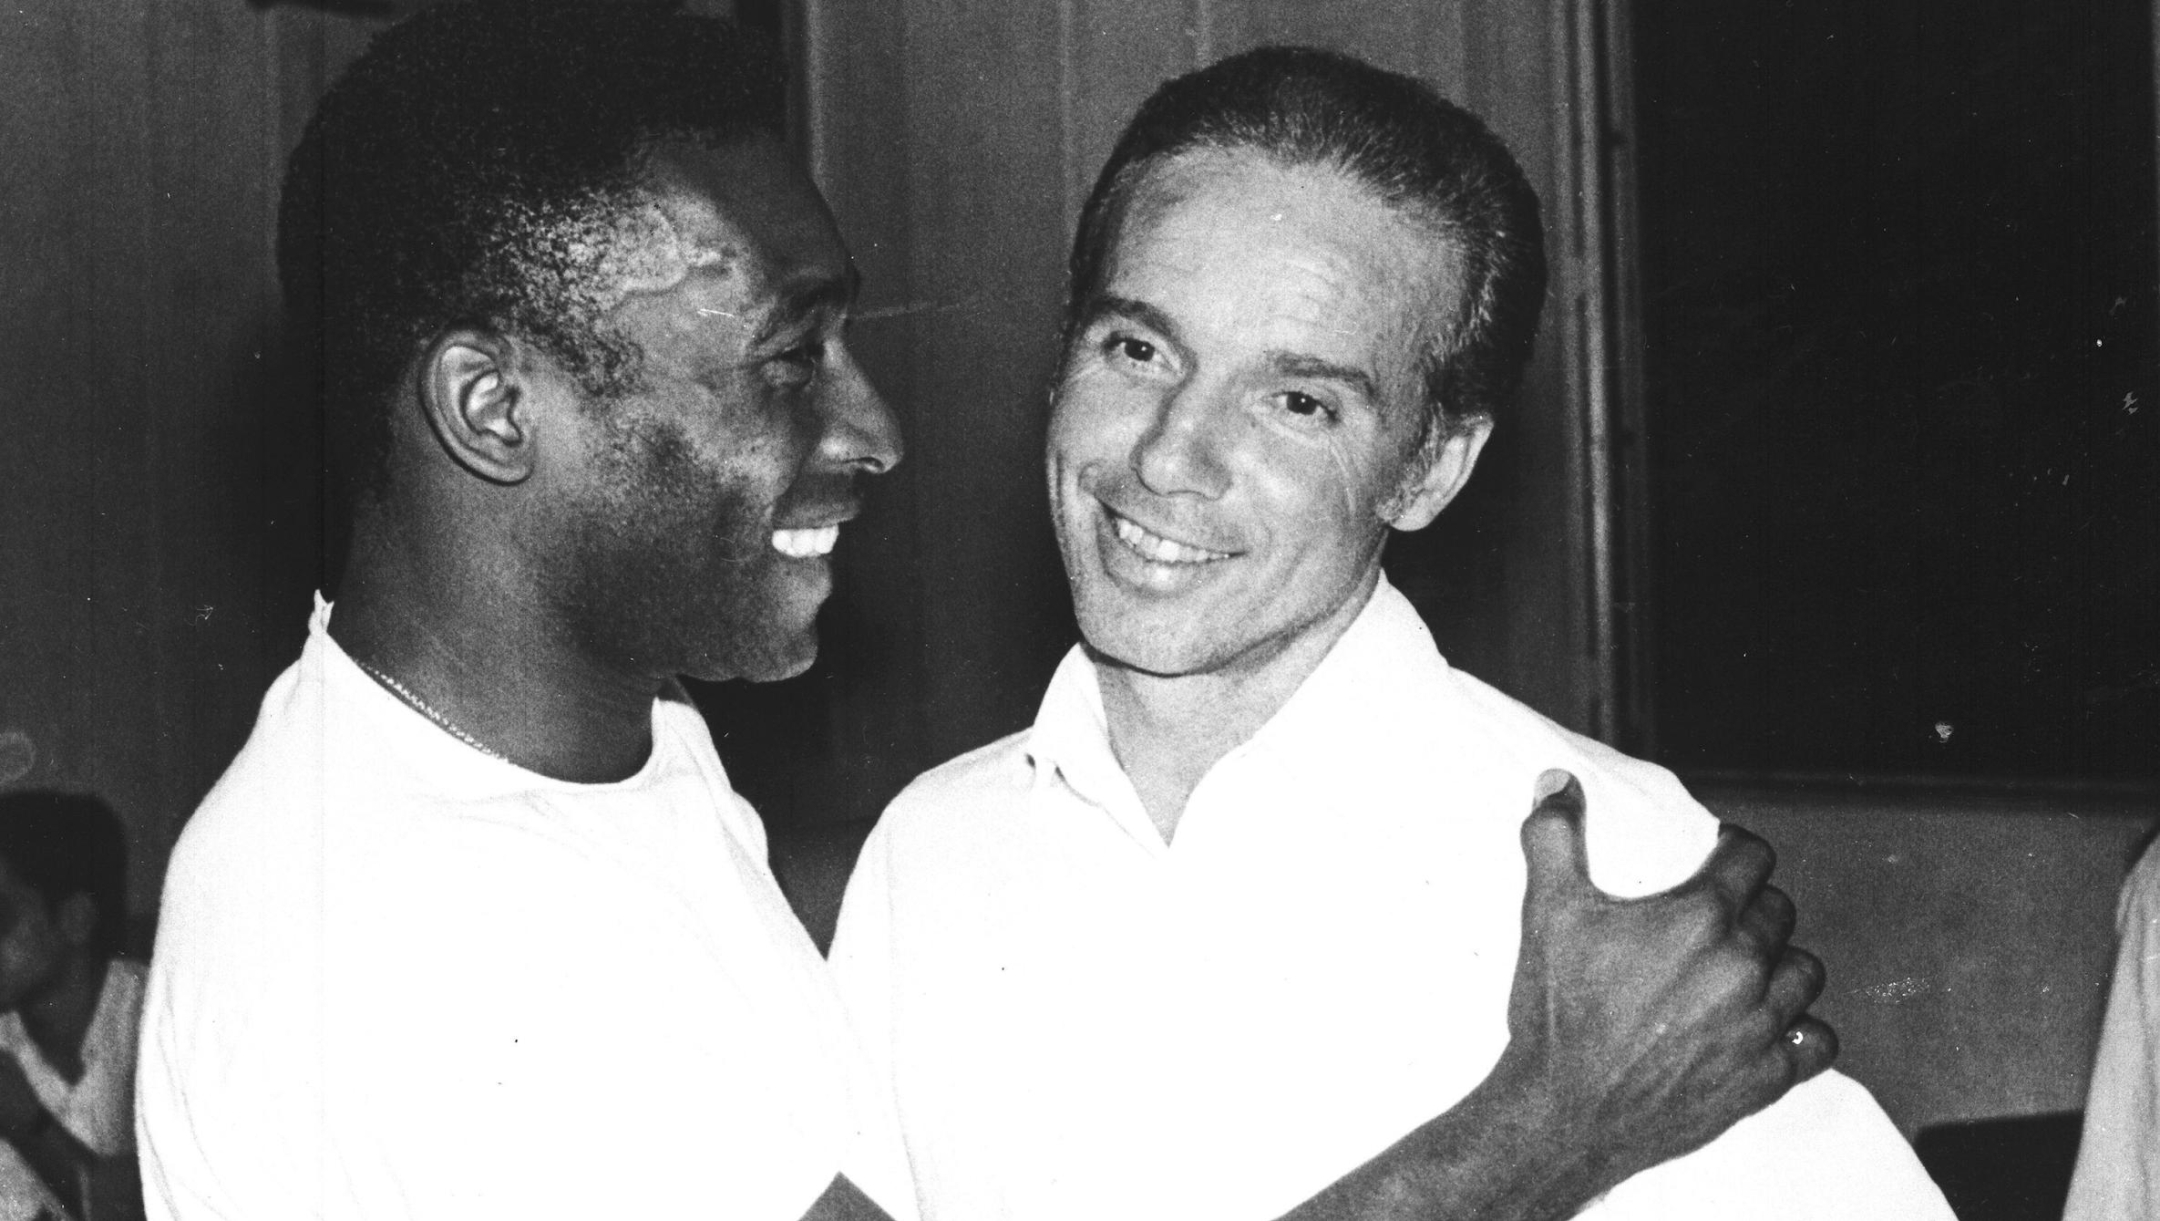 FILE - Brazil's soccer star Pele, left, embraces Mario Zagallo after the latter's appointment as coach of the Brazilian national soccer team, in Rio De Janeiro, Brazil, in March 1970. Zagallo, who reached the World Cup final a record five times, winning four, as a player and then a coach with Brazil, has died. He was 92. Brazilian soccer confederation president Ednaldo Rodrigues said in a statement in the early hours of Saturday, Jan. 5, 2024, confirming Zagallo's death that Zagallo "is one of the biggest legends" of the sport. (AP Photo, File)